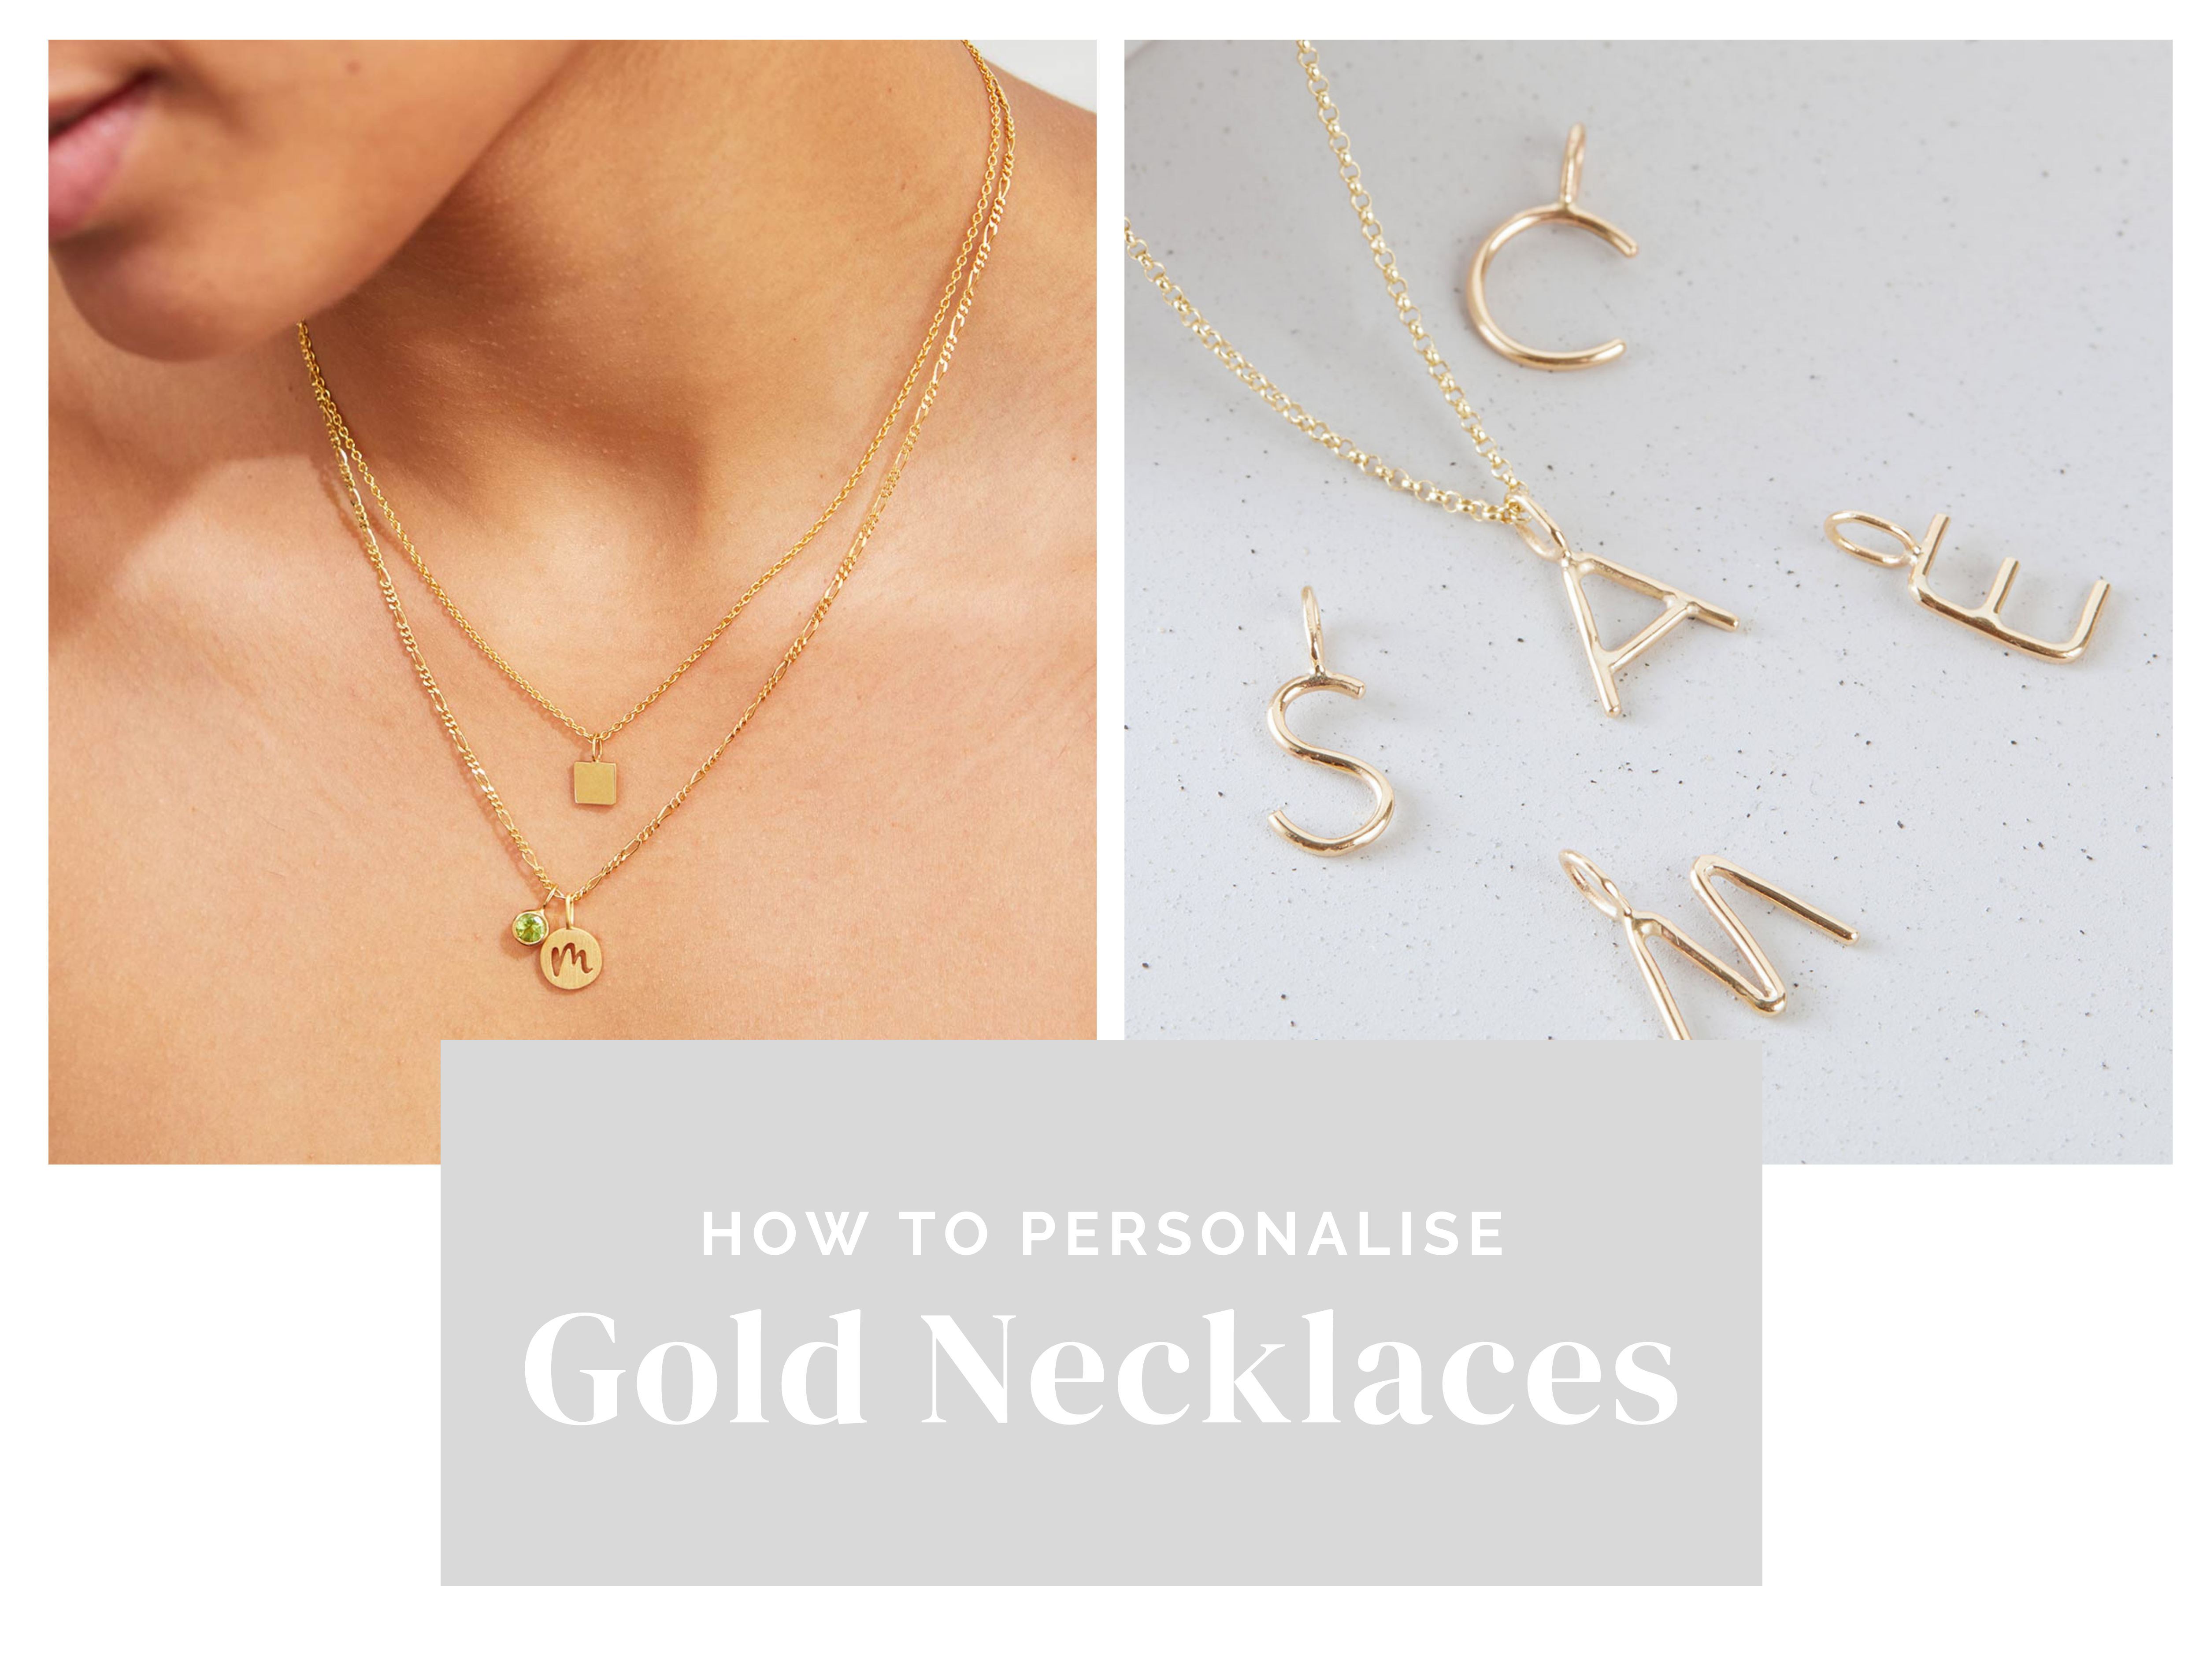 How to personalise gold necklaces by London jeweller Maya Magal